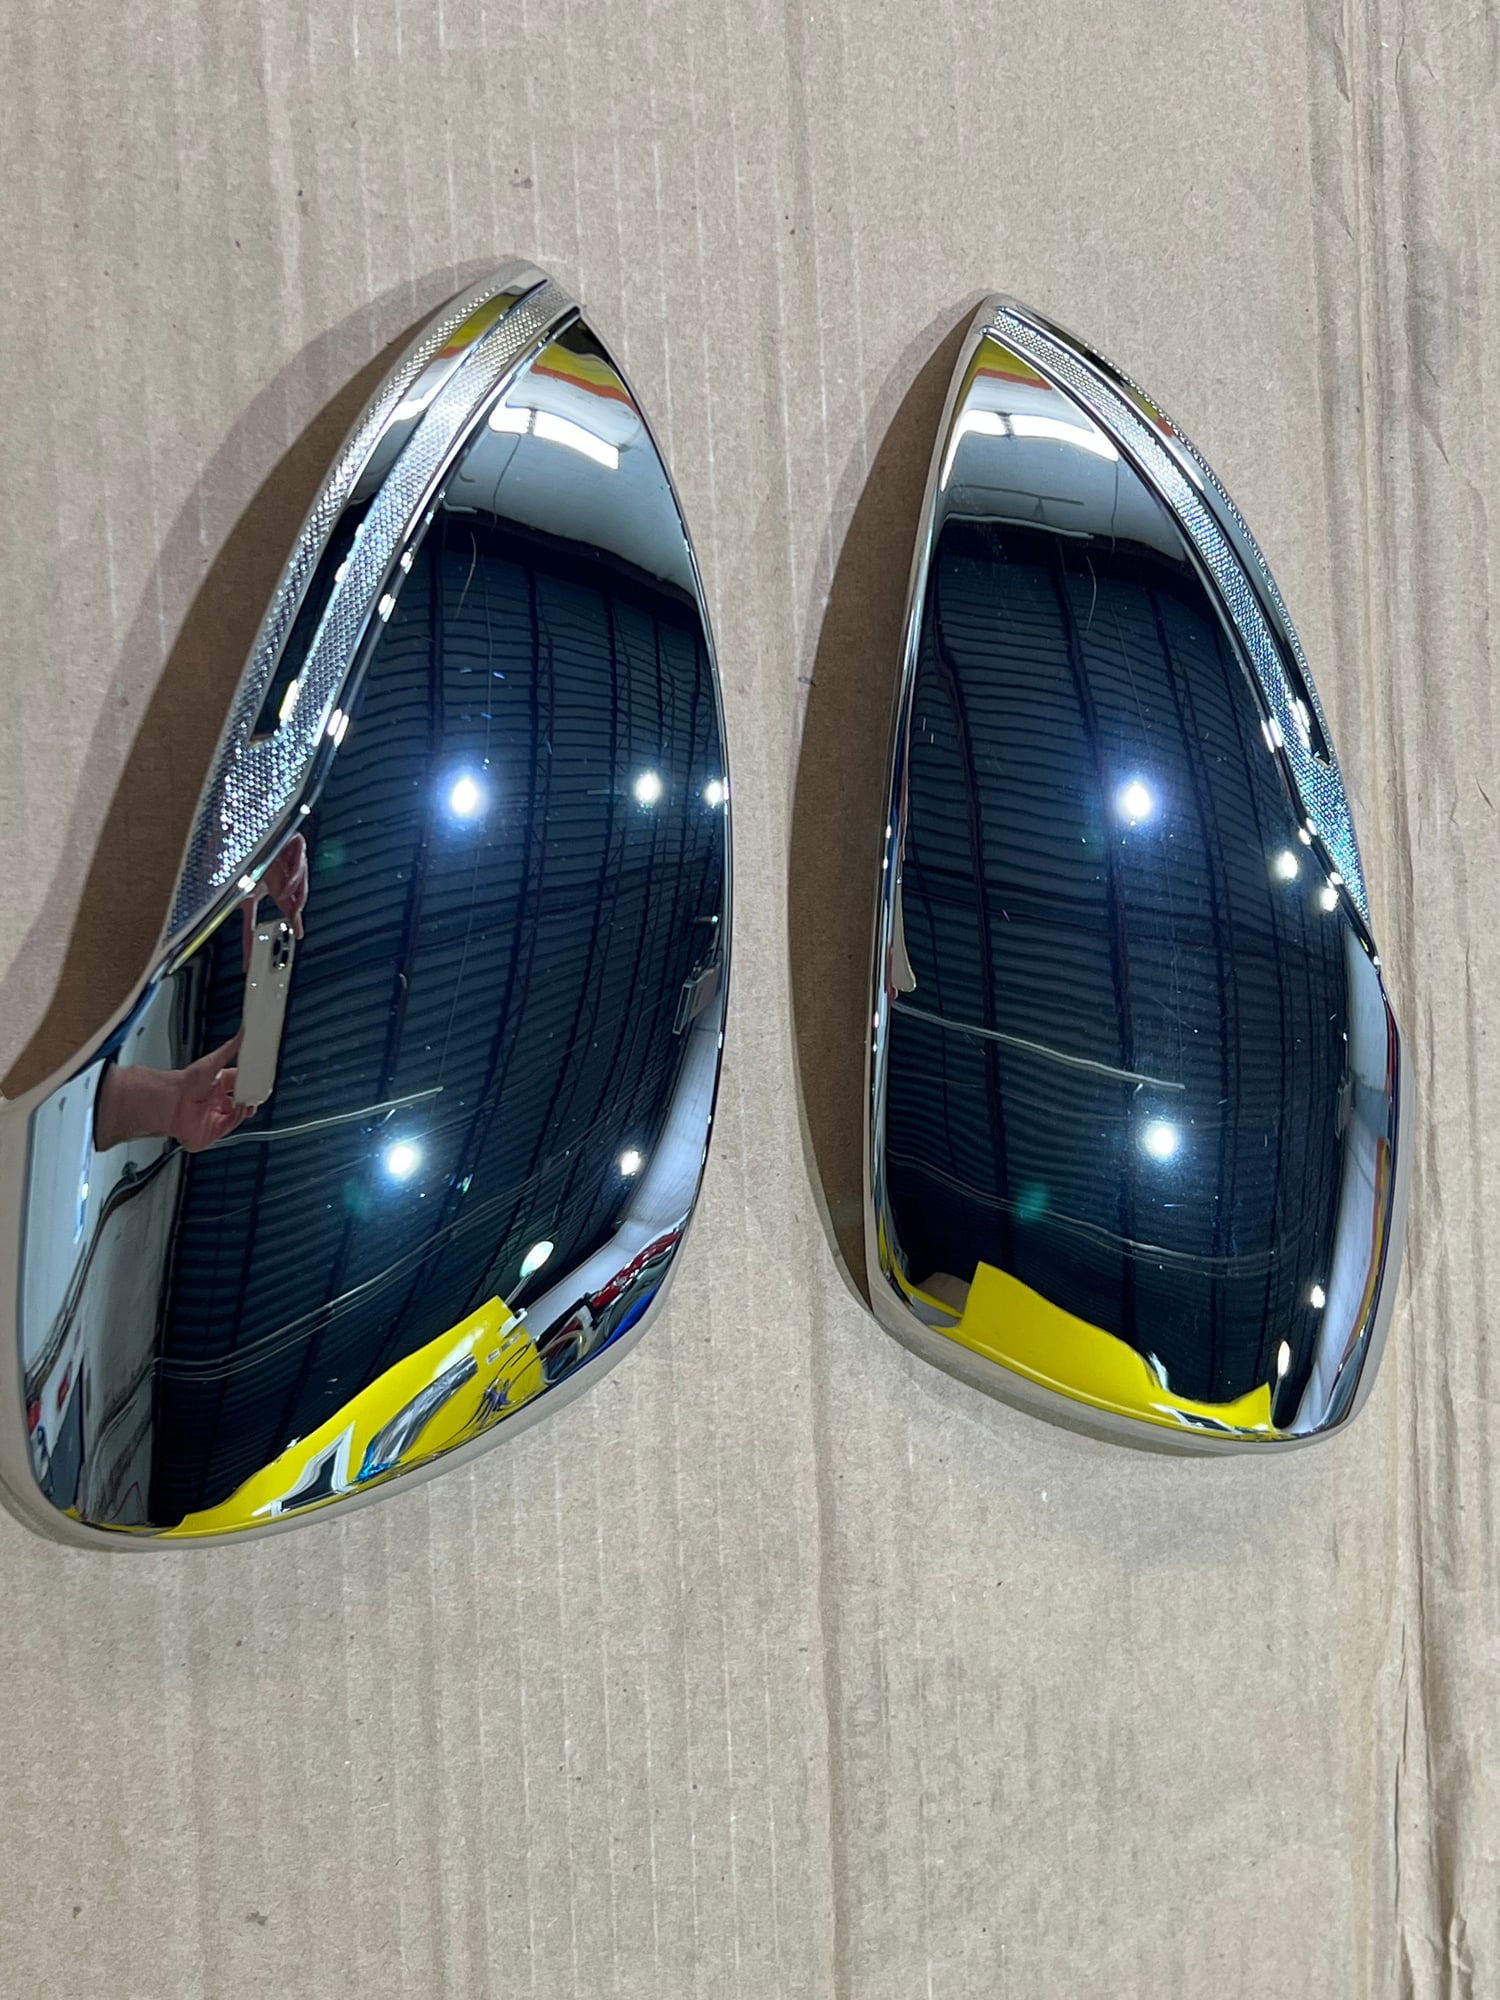 Accessories - Mercedes W219 CLS Chrome Mirror Covers 2006-2009 - Used - All Years  All Models - Ny, NY 10101, United States